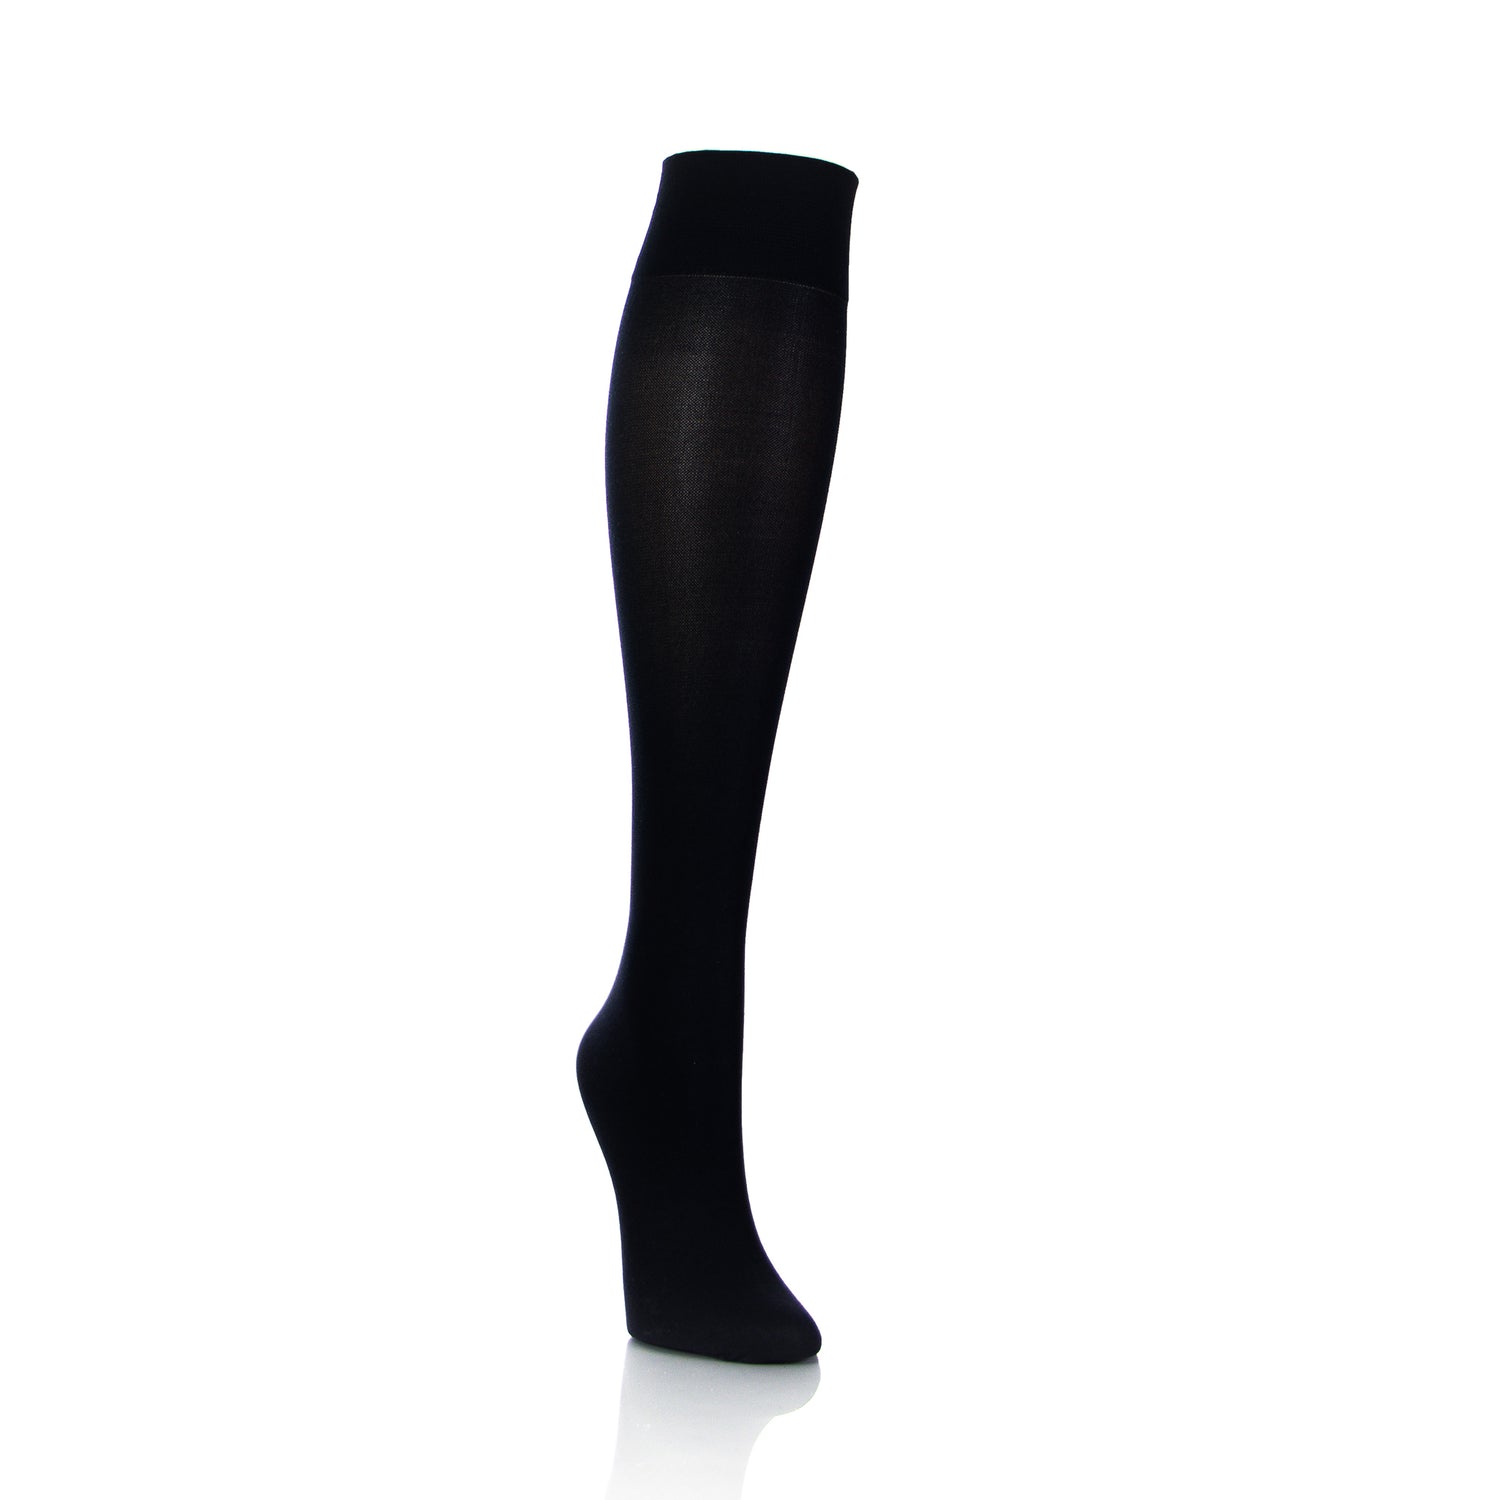 Compression Socks and Stockings